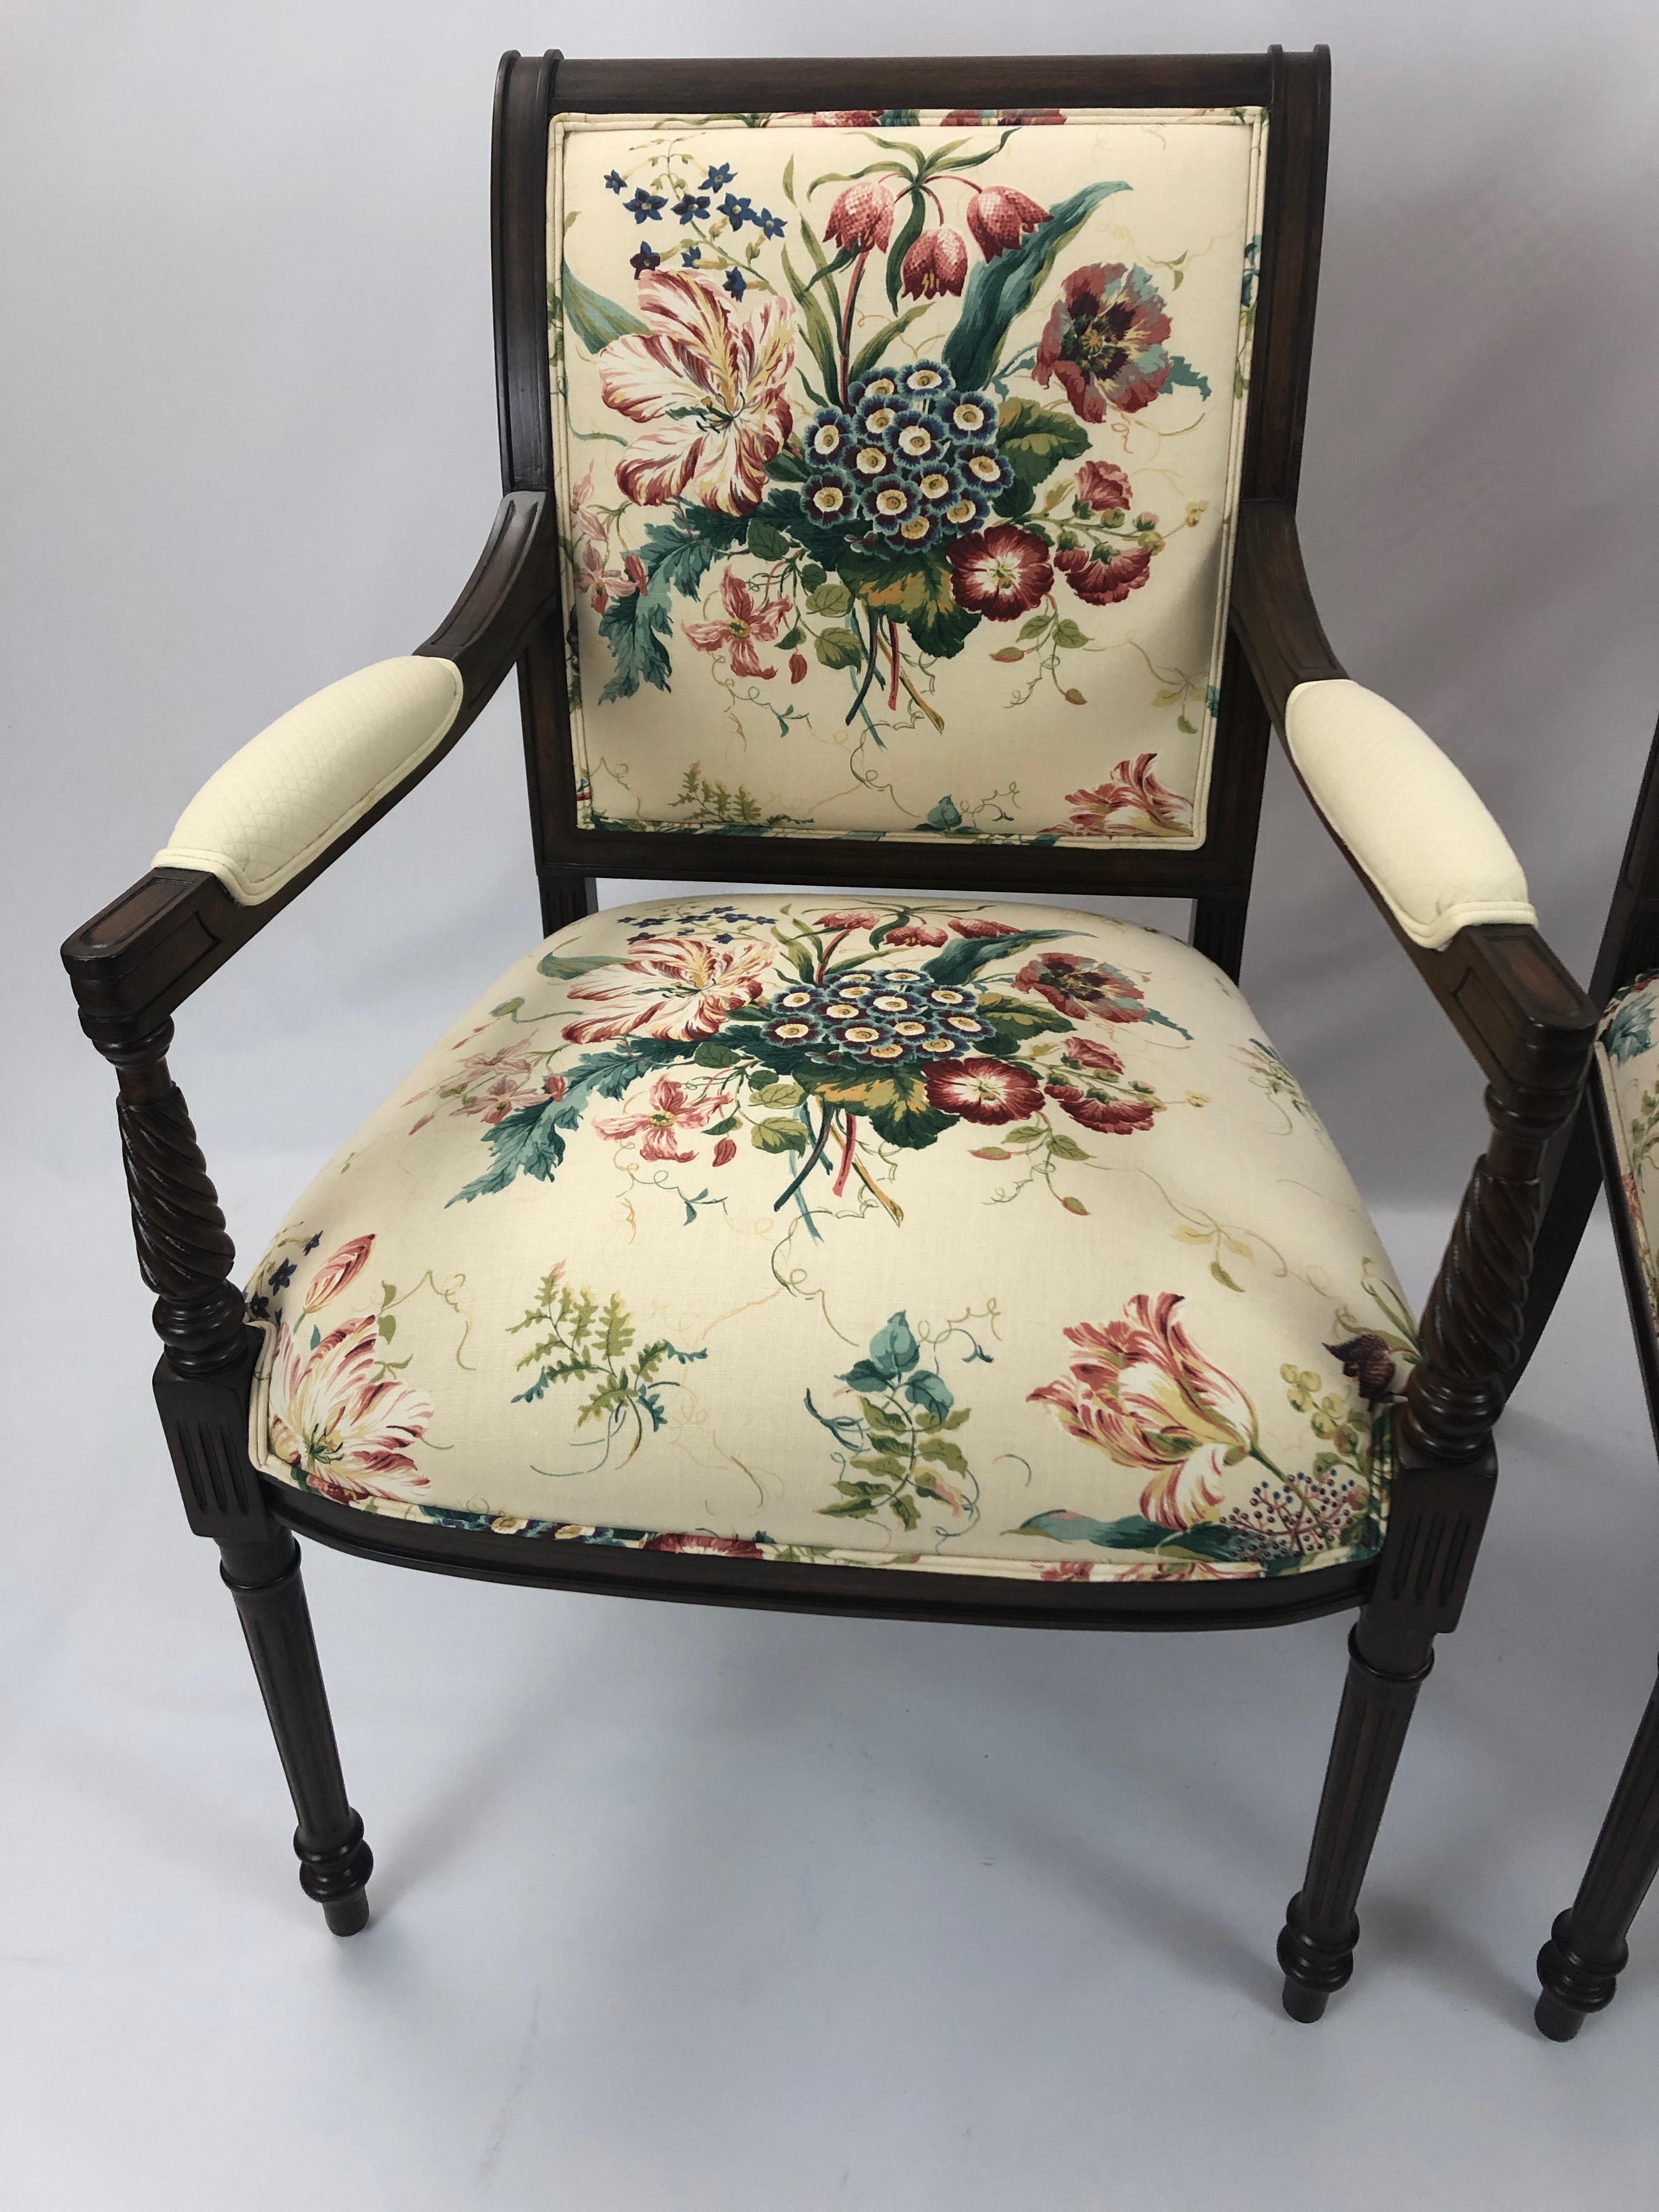 Two lovely fruitwood armchairs having elegant turned legs and pretty floral upholstery on the front and arms. The back is a coordinated raspberry solid upholstery.
Measures: Arm height 28.25
seat depth 19.